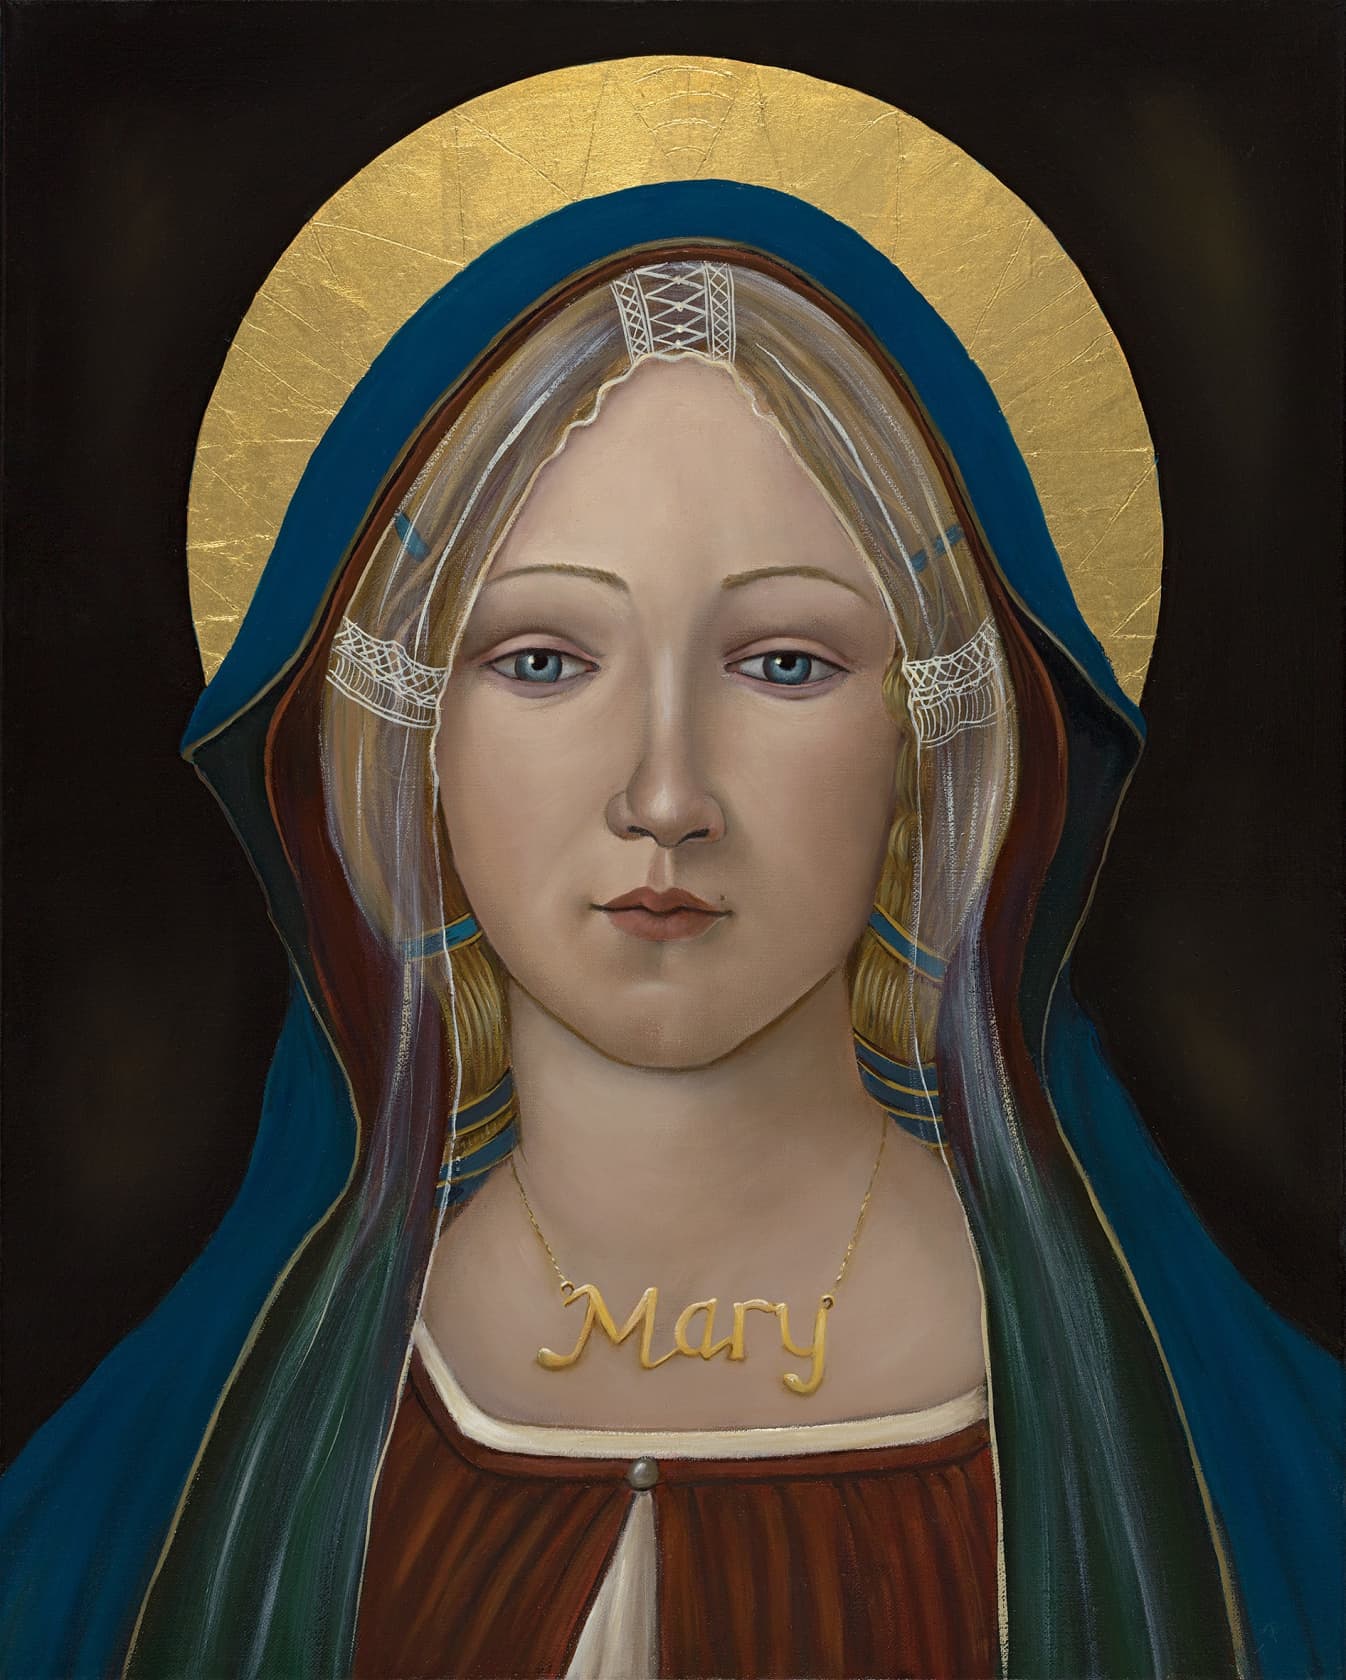 Ross Muir Wee Mary Oil and 24k Gold Leaf on Linen